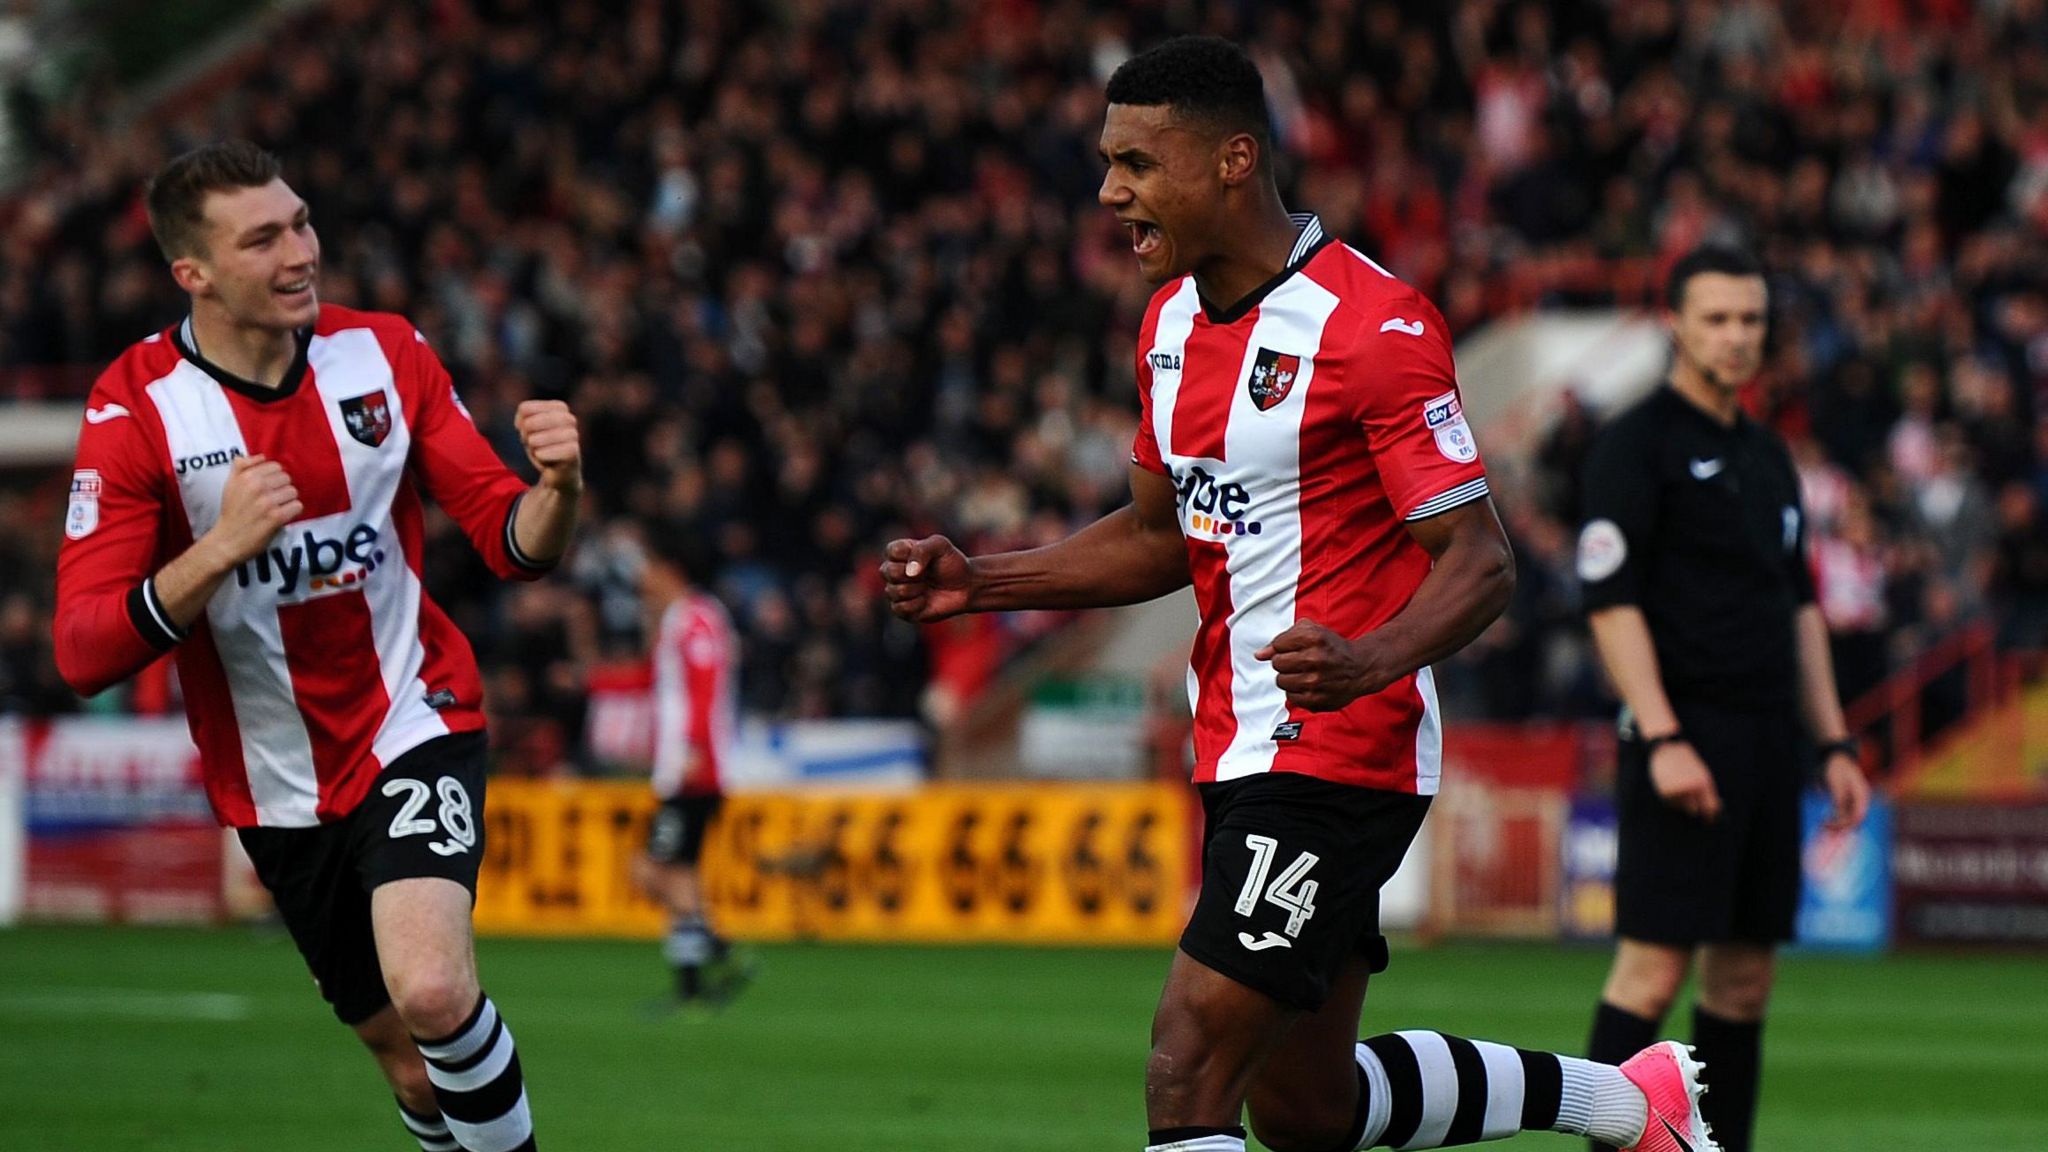 Ollie Watkins playing for Exeter, celebrates a goal as he exclaims with his fists clenched